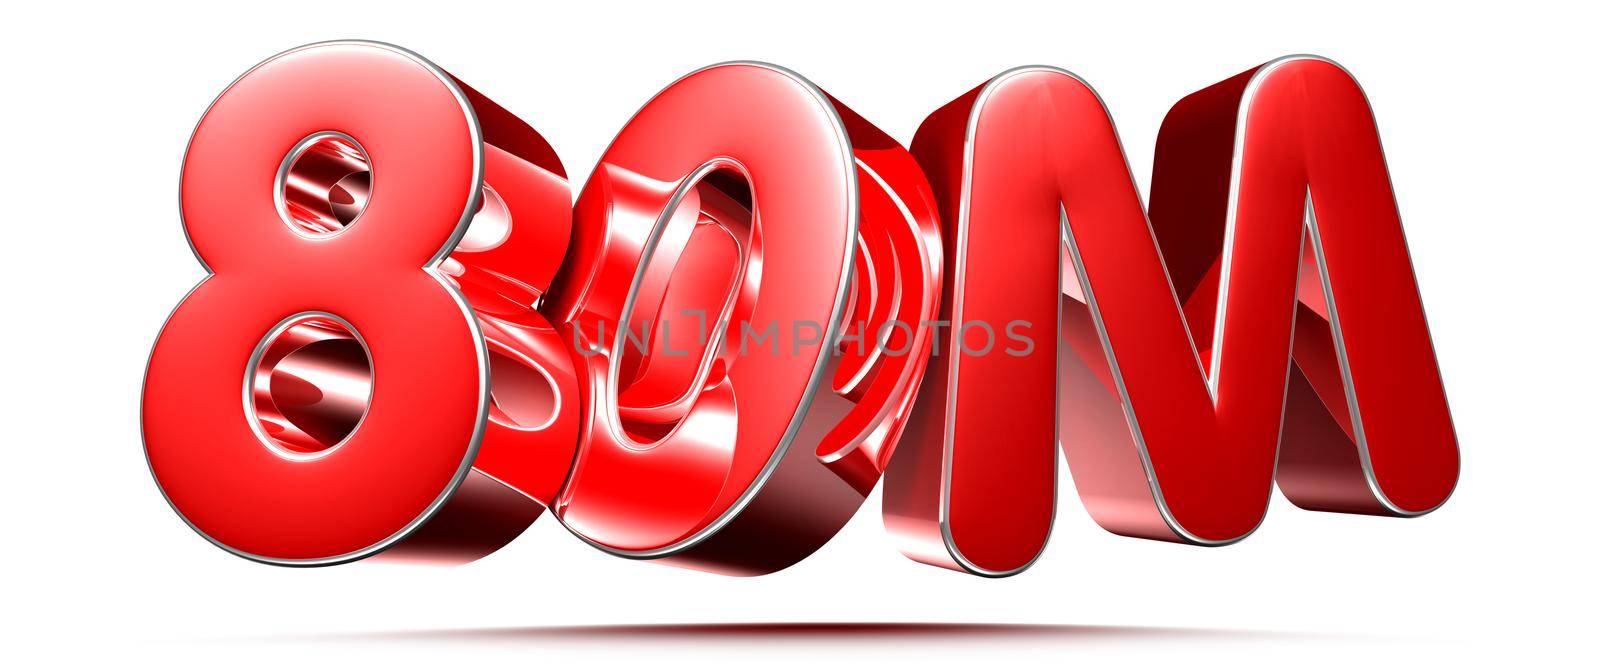 80m red 3D illustration on white background with clipping path.